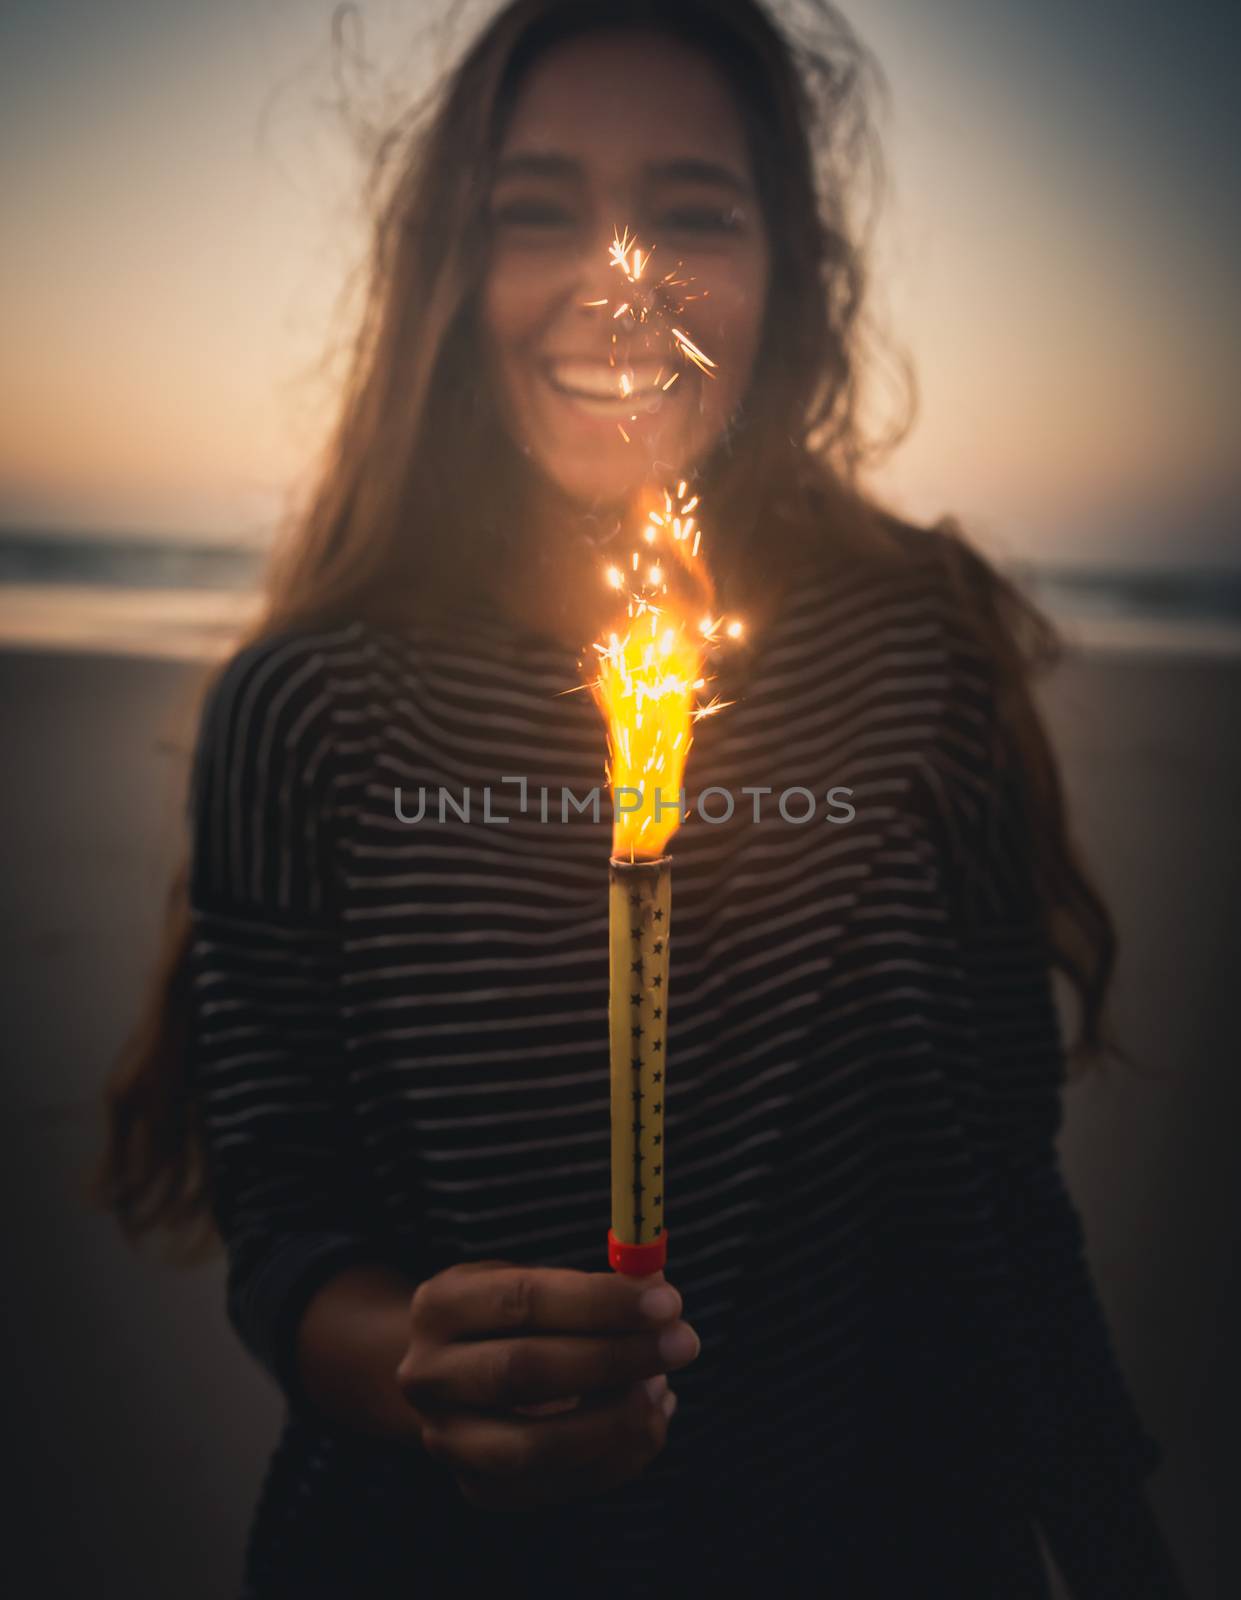 Girl with Fireworks by Iko